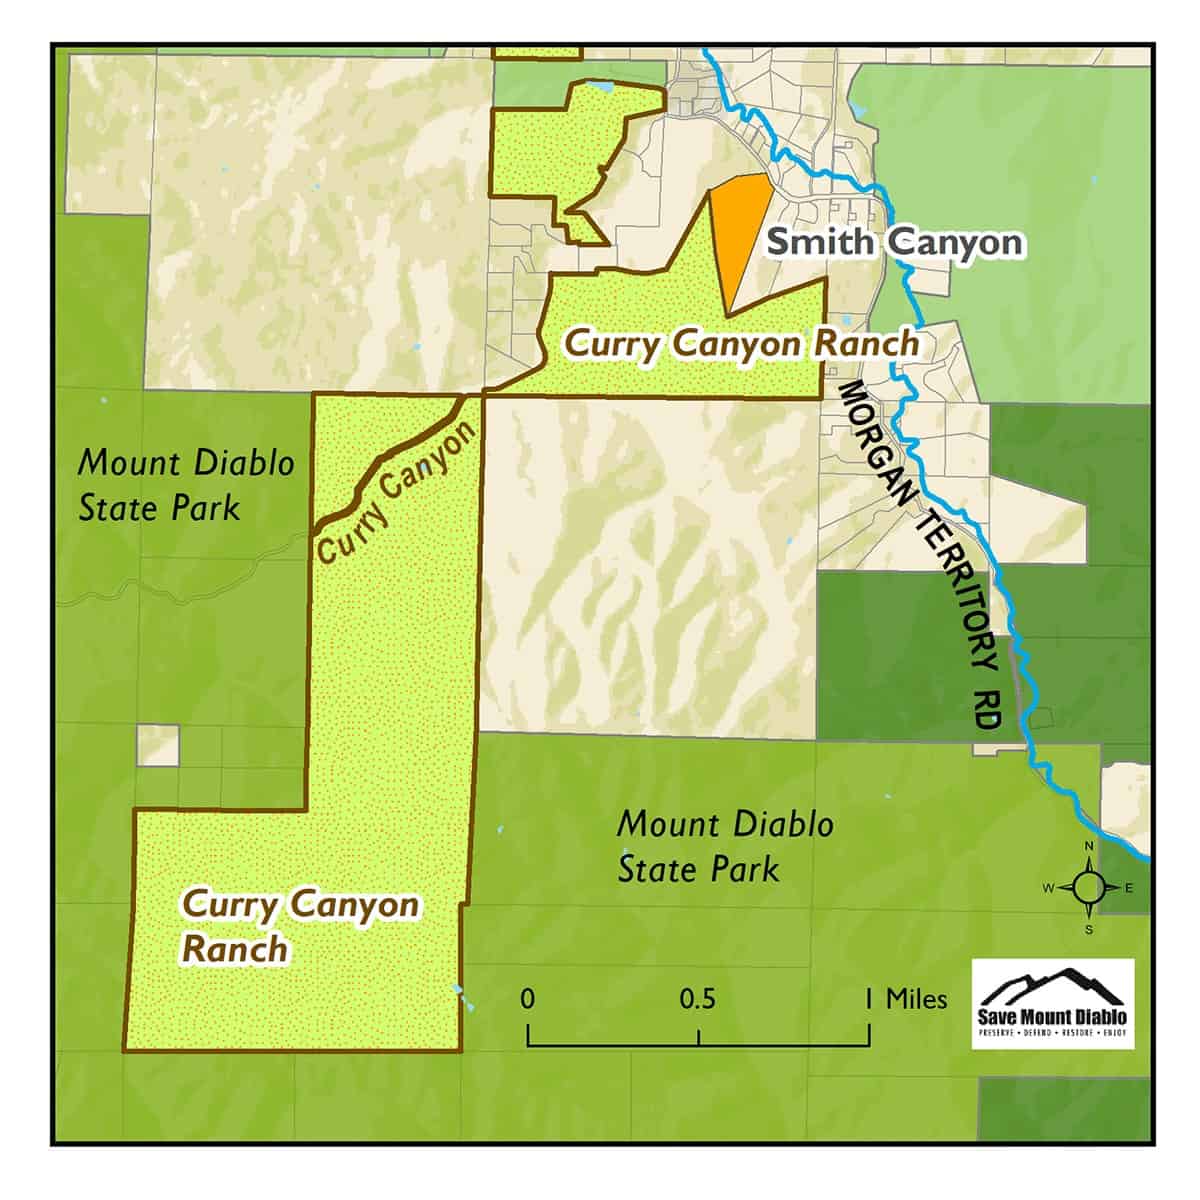 Closeup map of the proposed Smith Canyon acquisition next to Curry Canyon Ranch and then Mount Diablo State Park